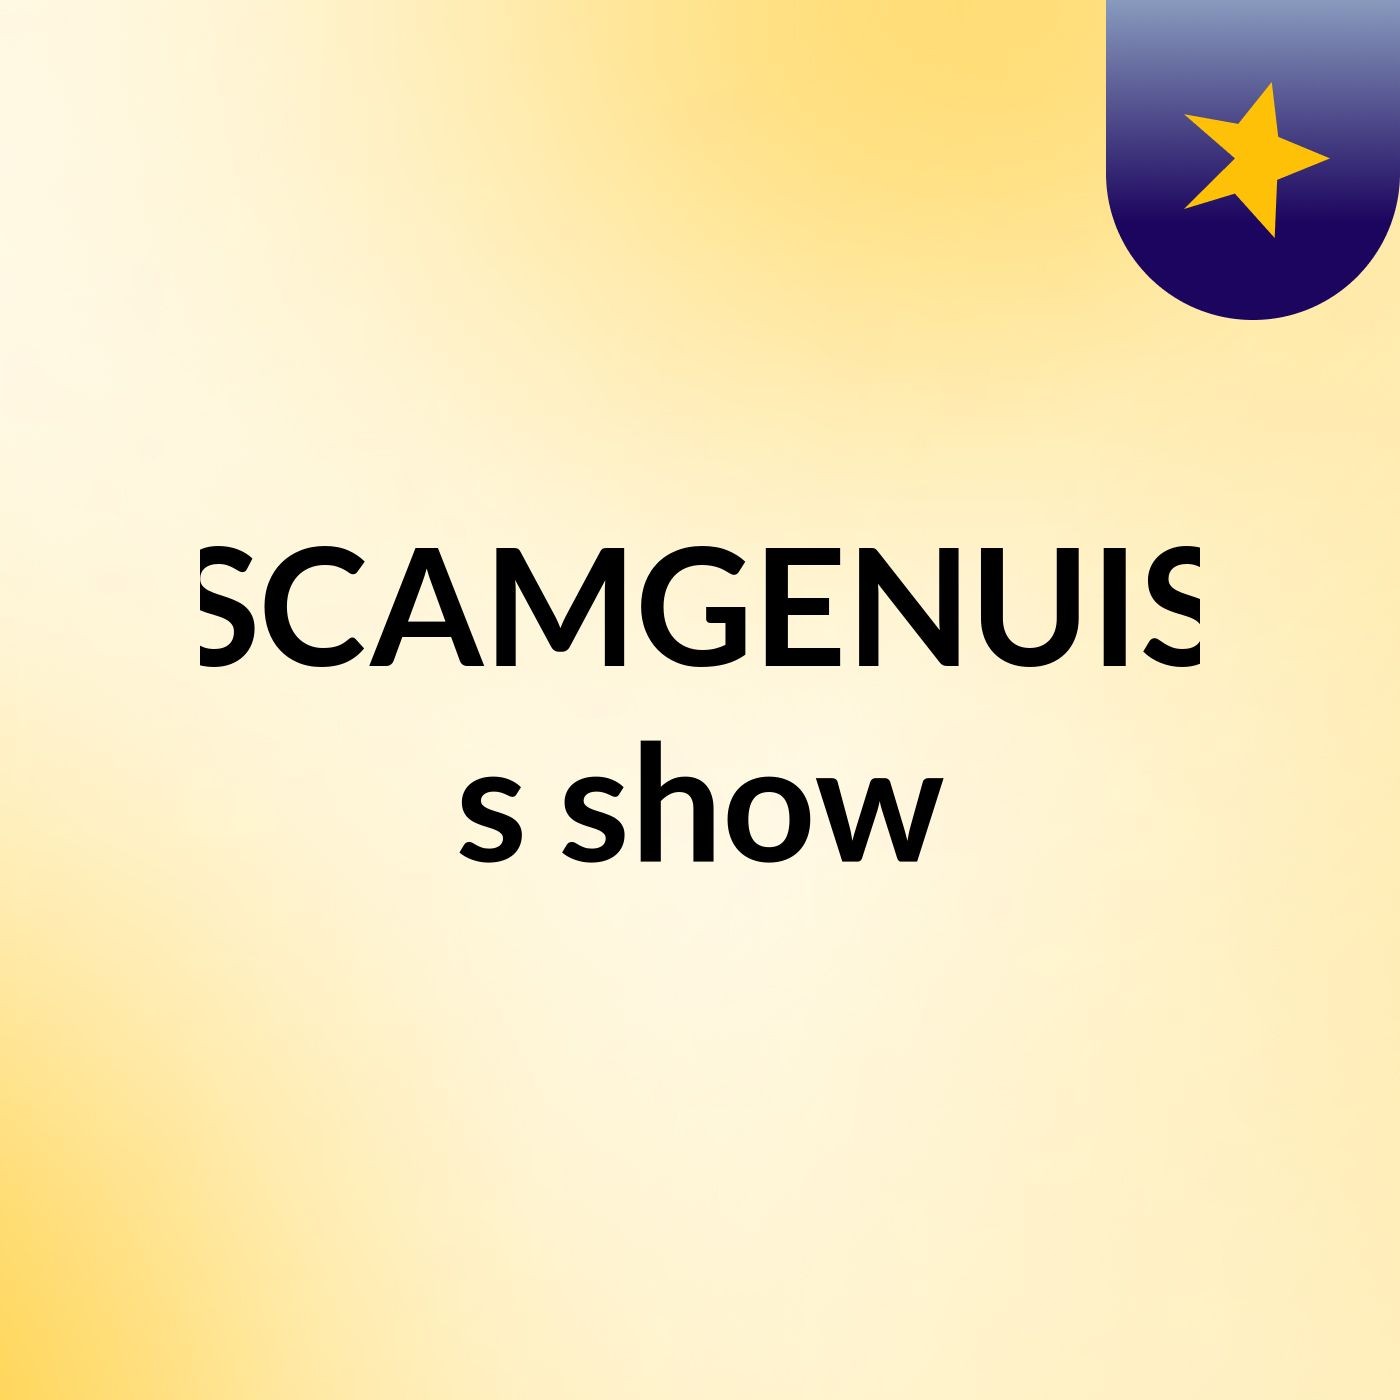 SCAMGENUIS's show